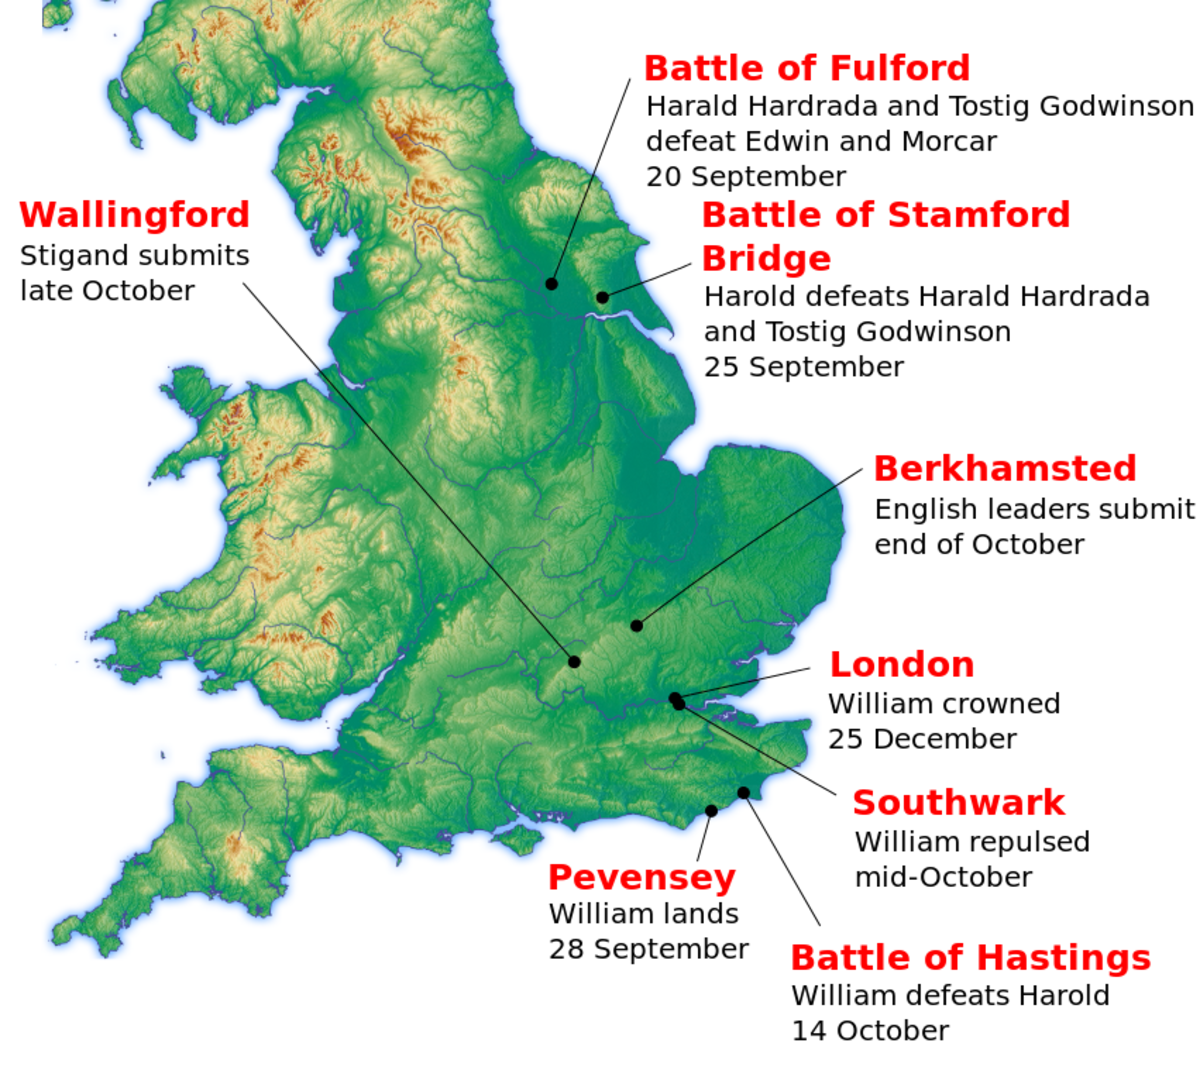 Conquest - 11: Uprising in Northumbria - the Struggle Begins Anew for Unity Against William